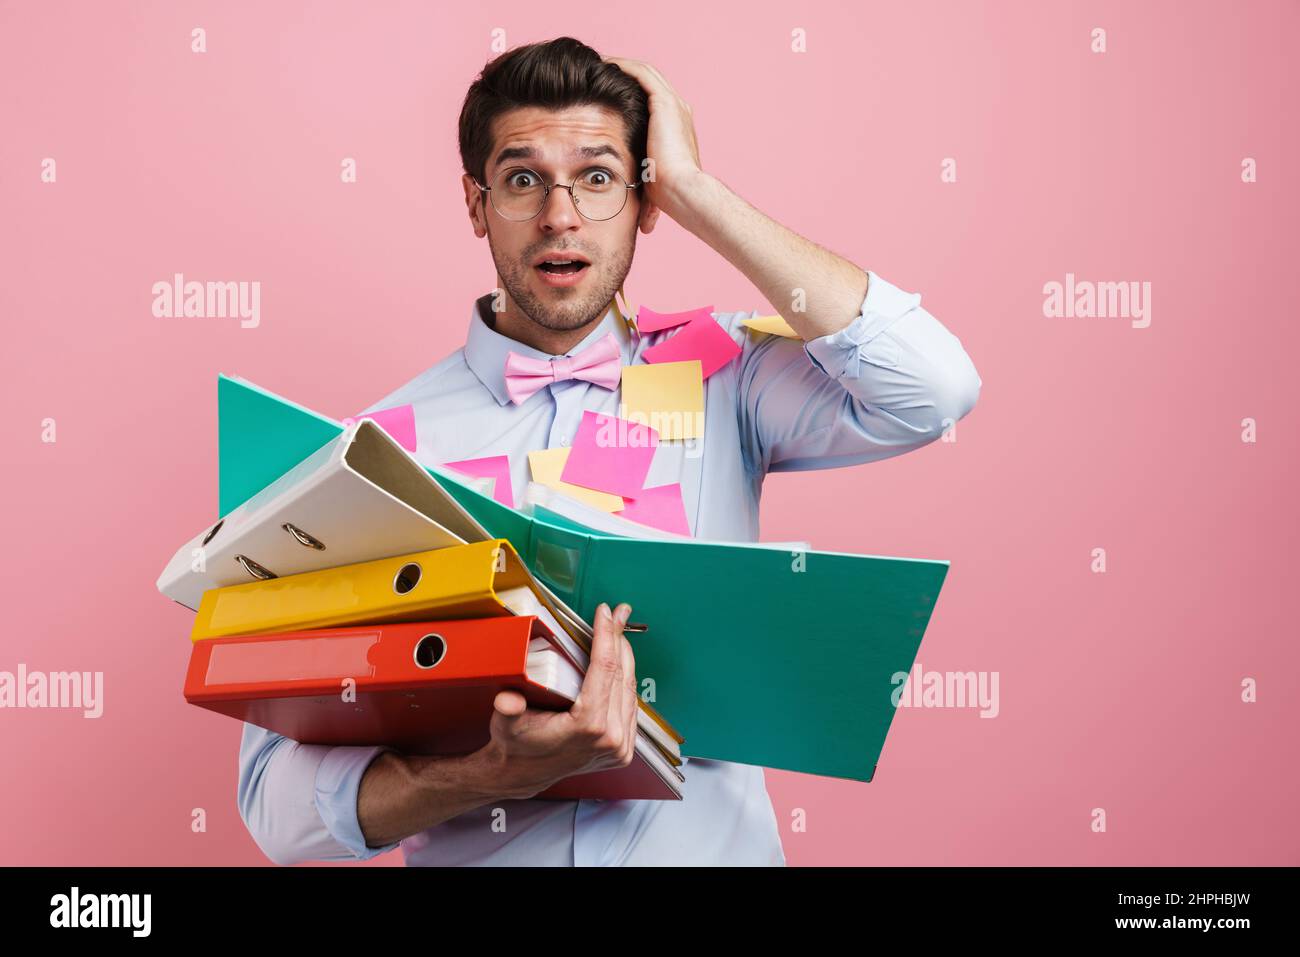 Young white shocked man with stickers posing with document cases isolated over pink background Stock Photo